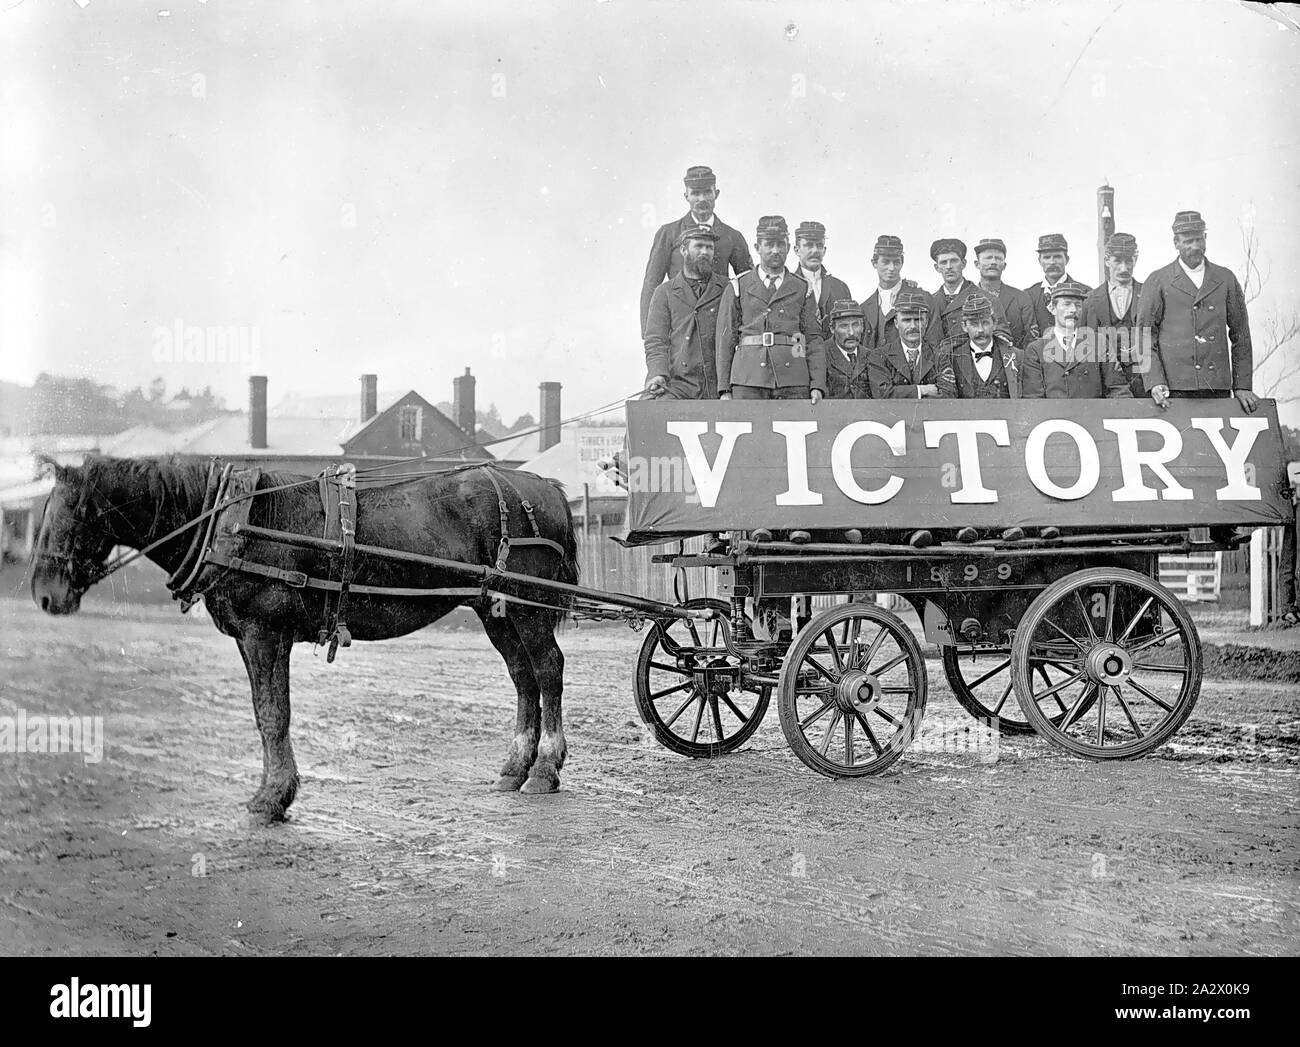 Negative - Casterton, Victoria, 1900, Members of the Casterton horse-drawn fire brigade with a banner on their carriage celebrating the Relief of Mafeking. The banner reads: 'Victory Stock Photo